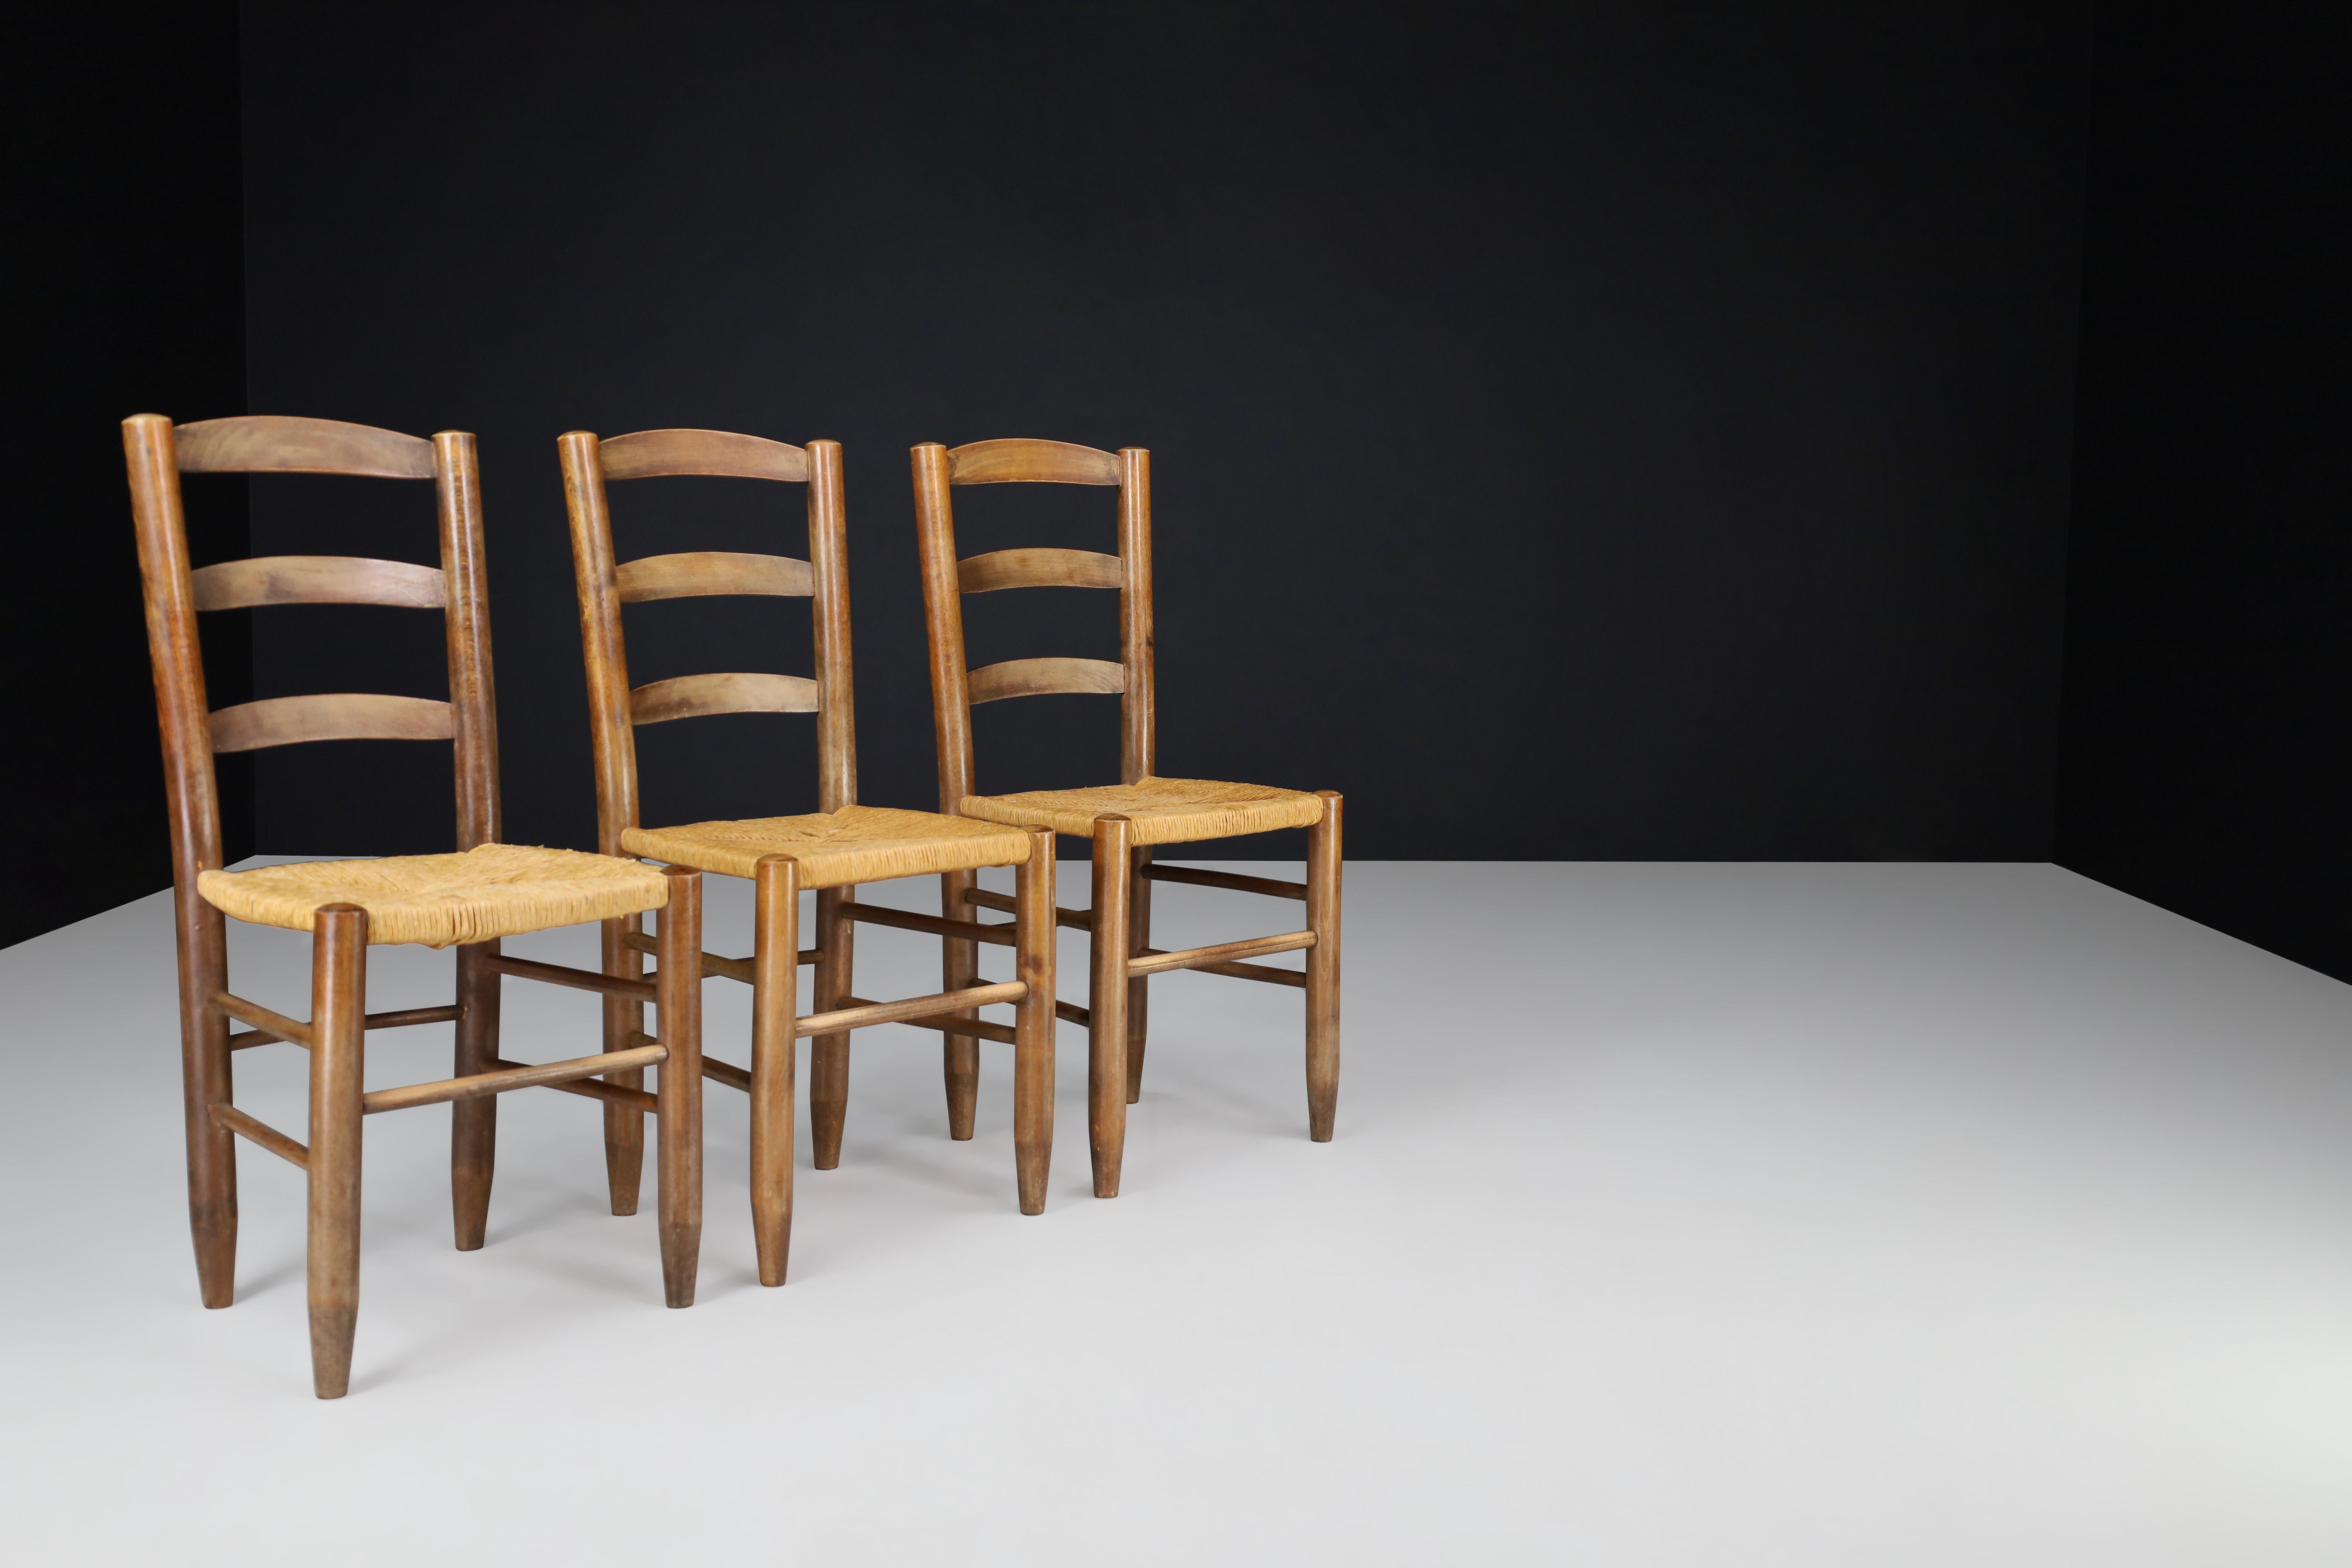 French Charlotte Perriand Style Dining Chairs Set of Four, France, 1950s For Sale